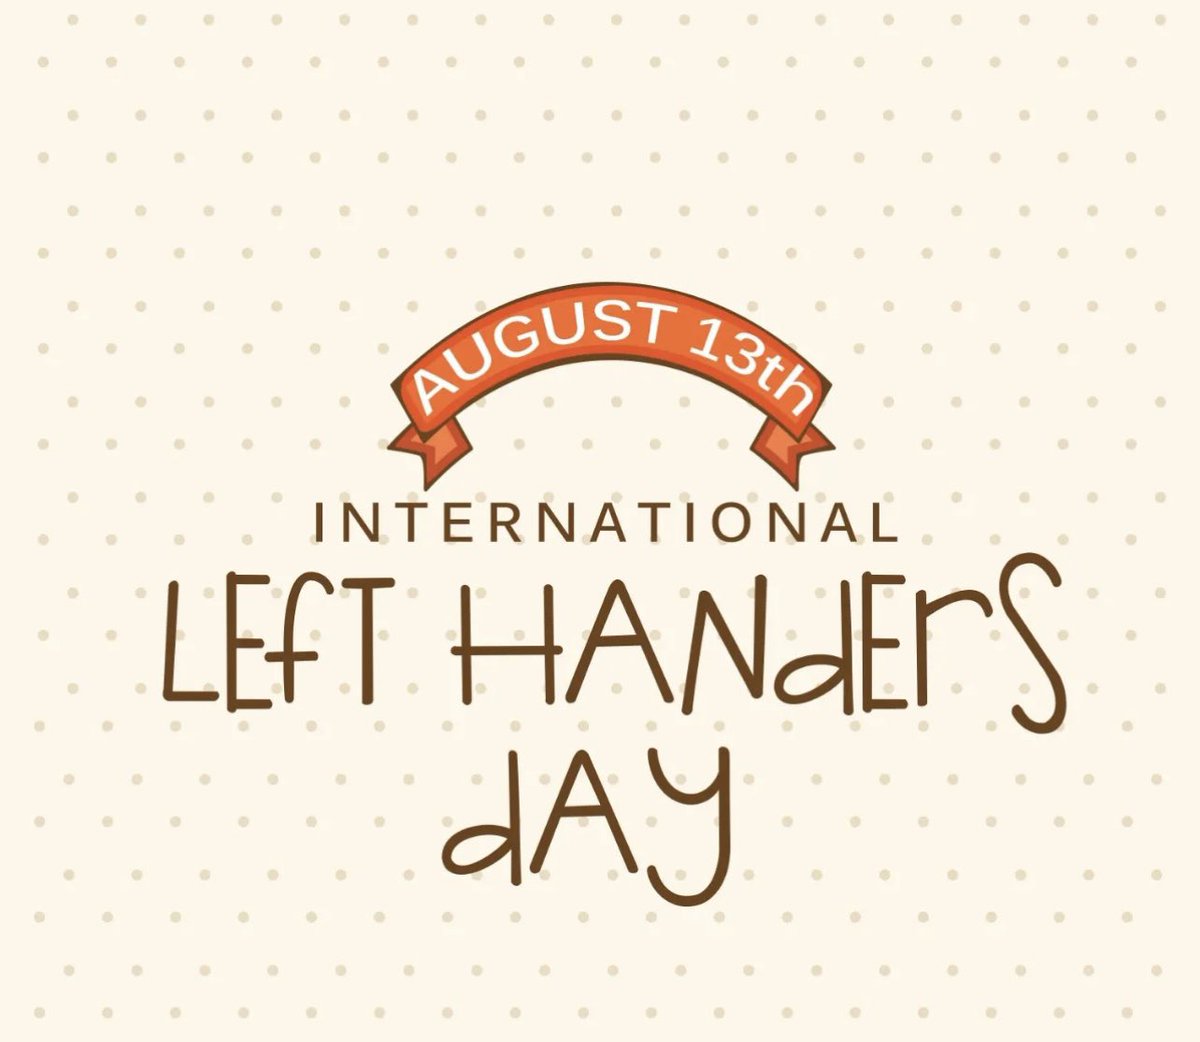 Happy #InternationalLeftHandersDay to all my fellow left-handers who know the struggles of growing up in a right-handed 🌎 xx